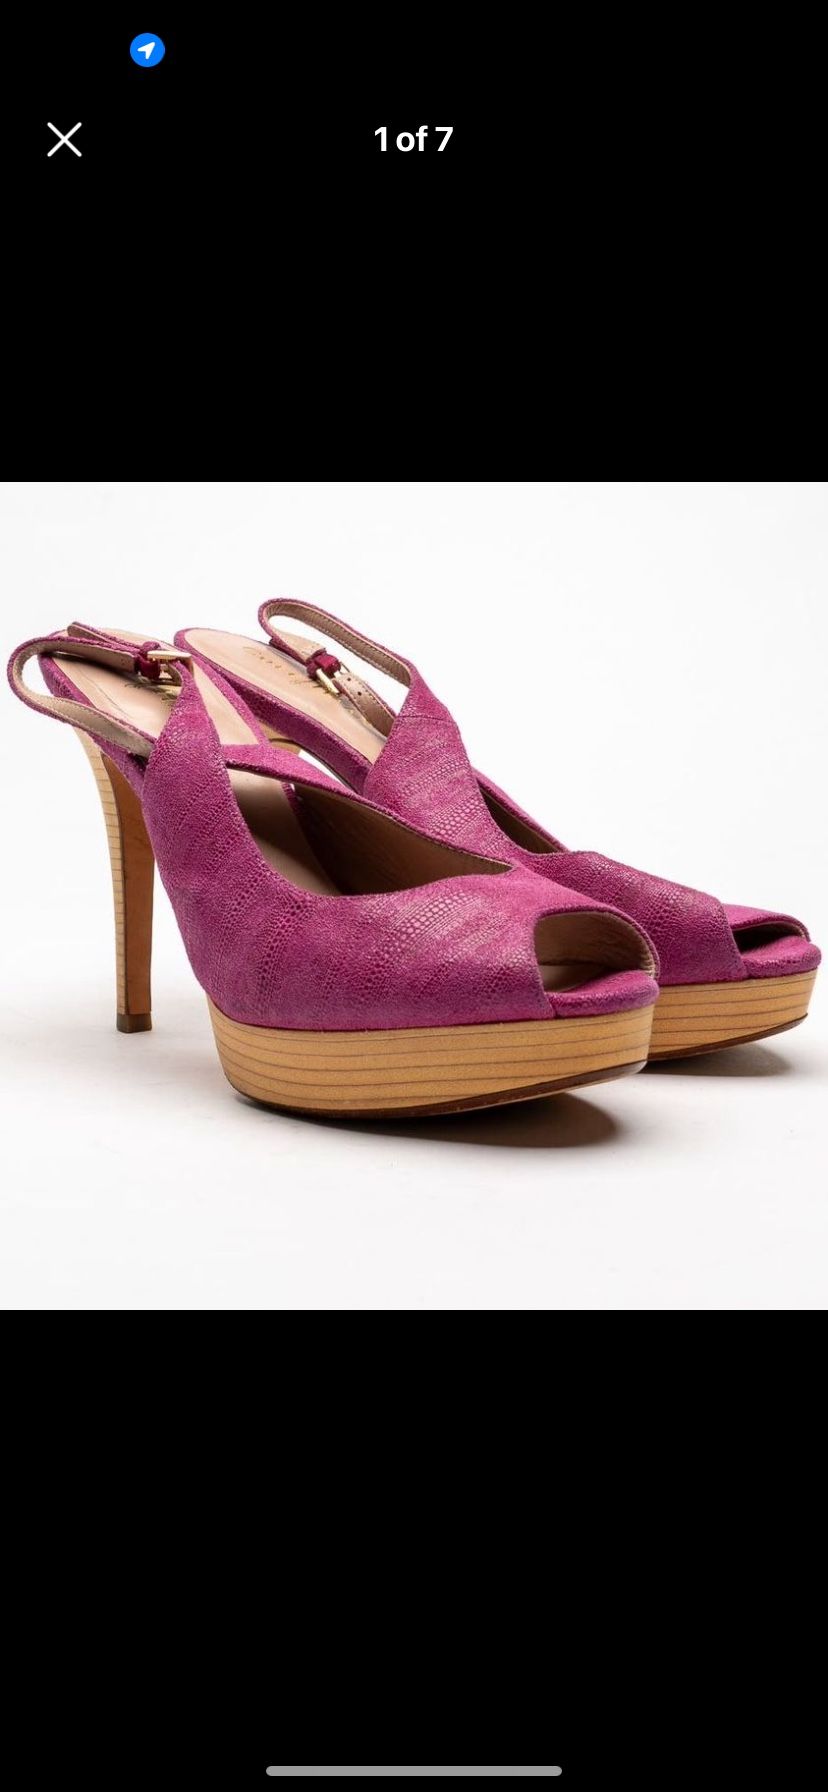 Cole Haan Hot Pink Textured Leather Open Toe Slingback Heels Pumps Size 10B